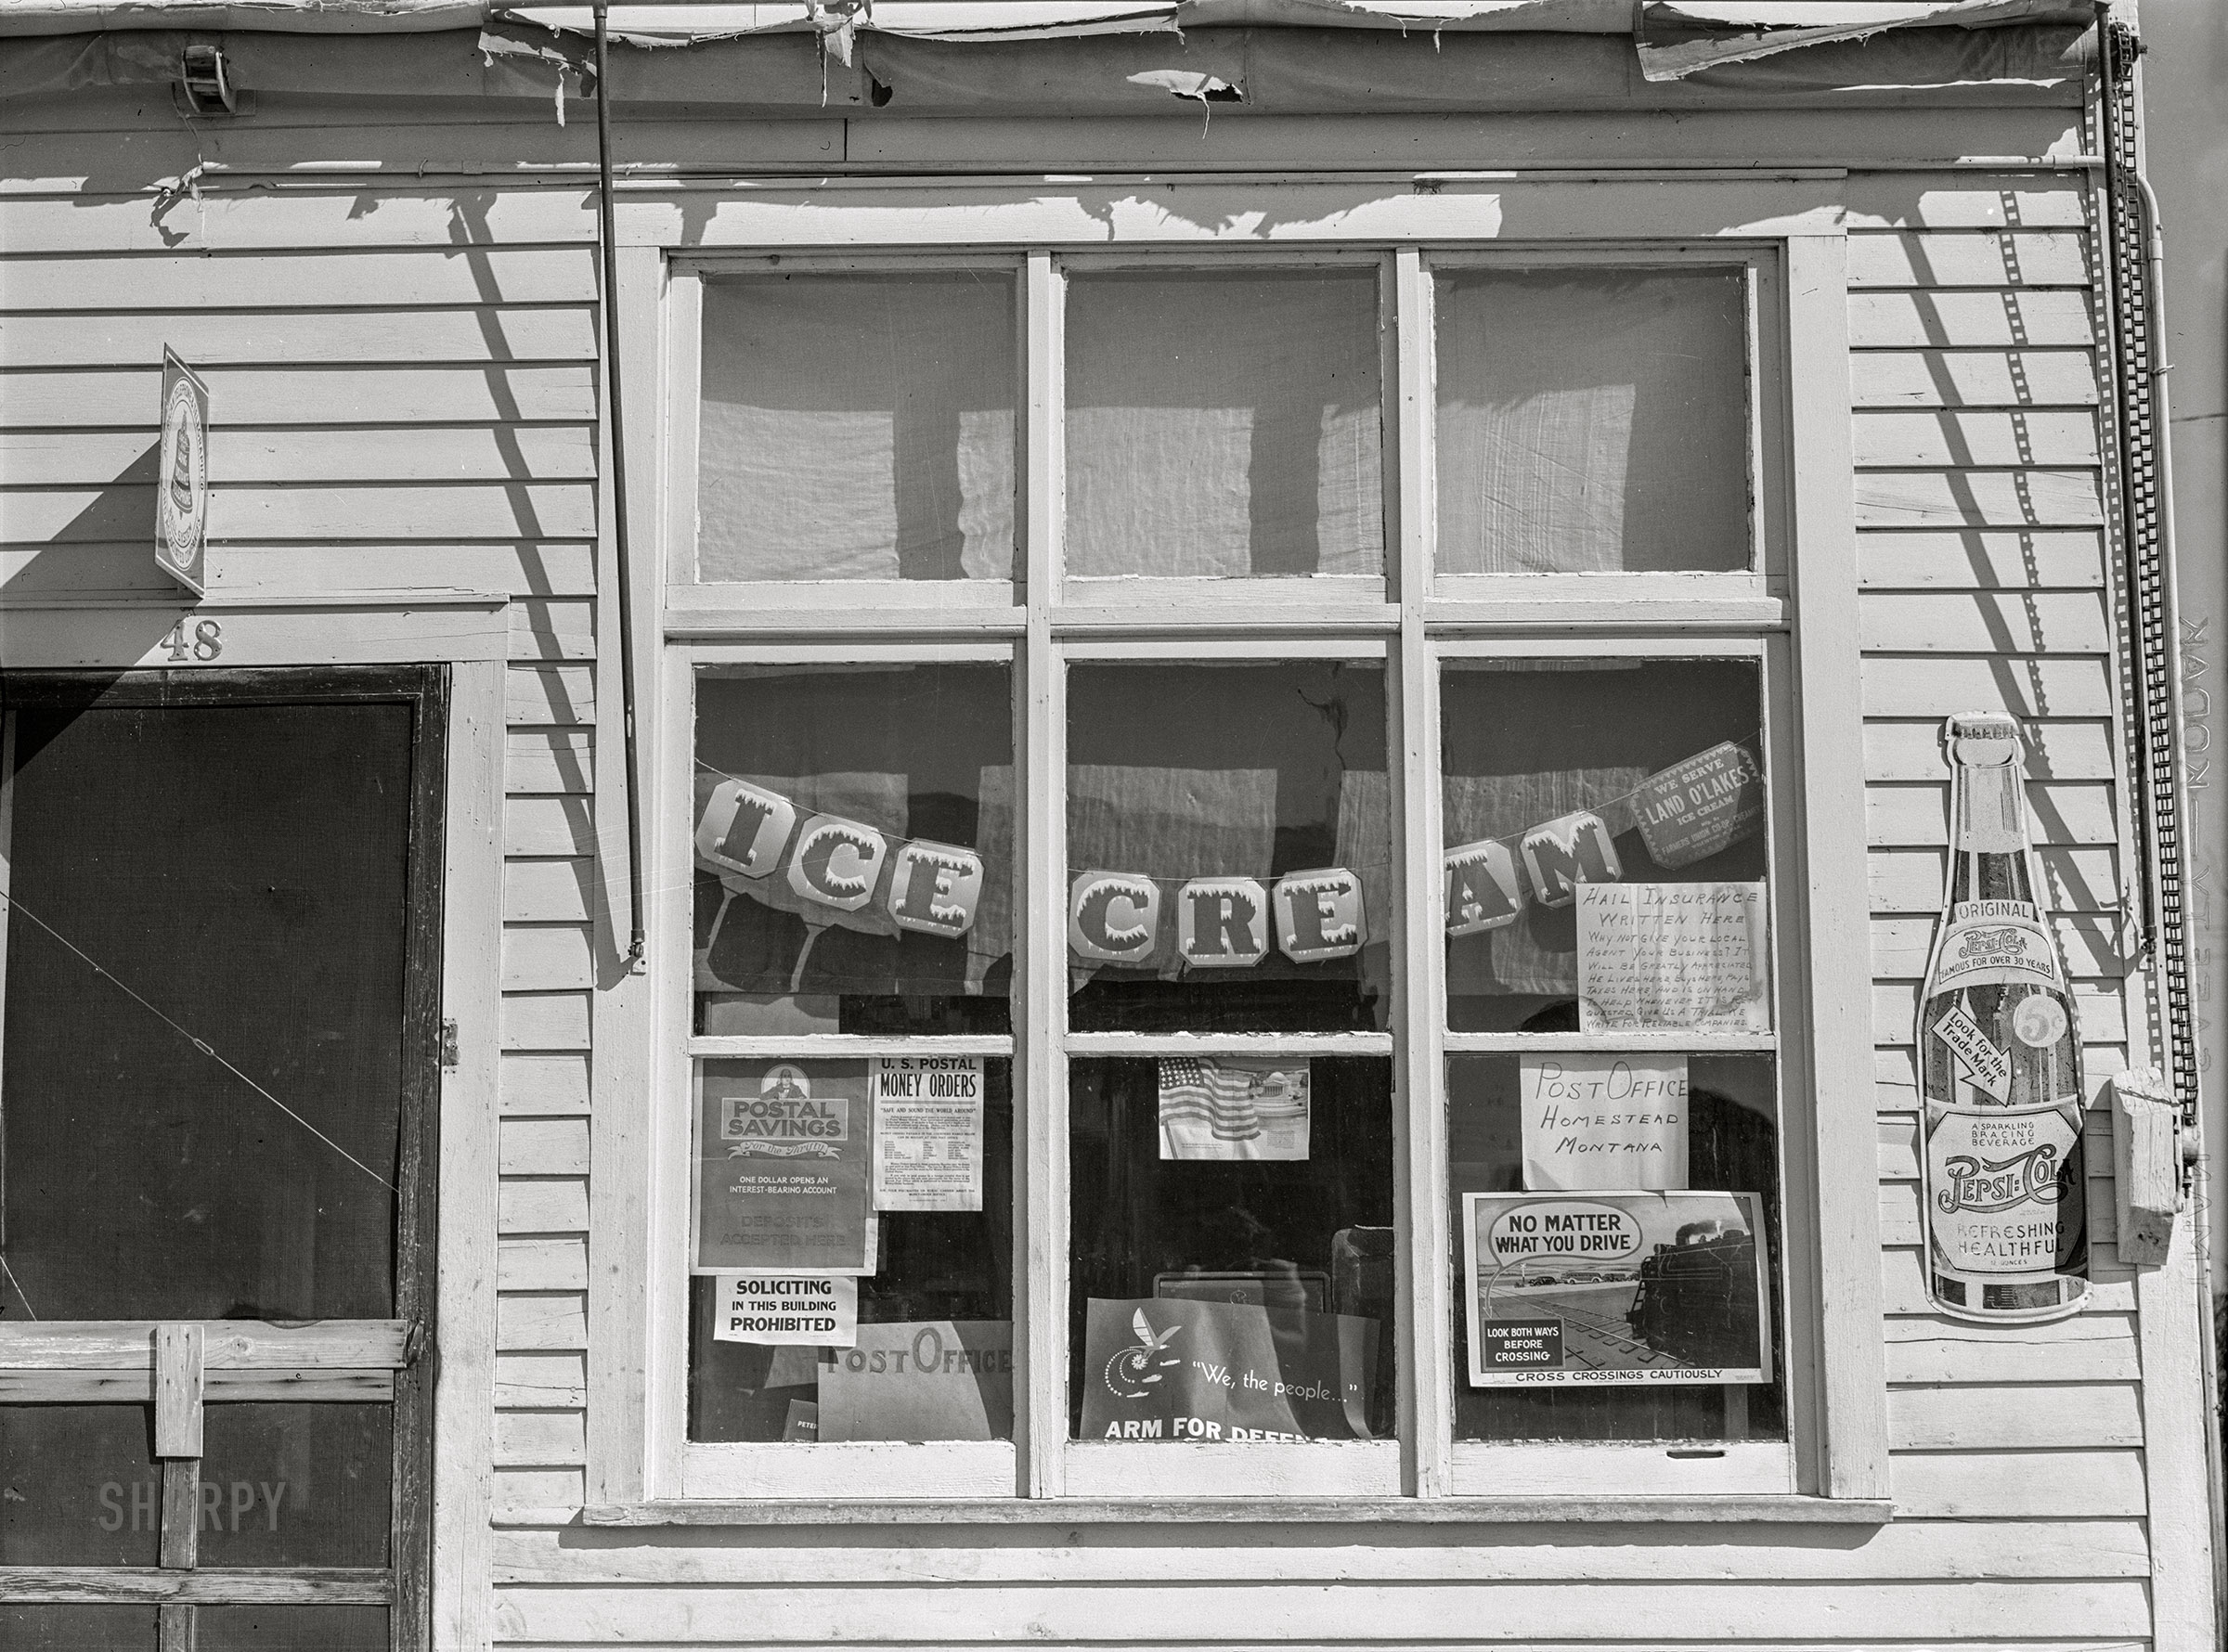 August 1941. "Window of post office and store in Homestead, Montana." Medium format negative by Marion Post Wolcott for the Farm Security Administration. View full size.